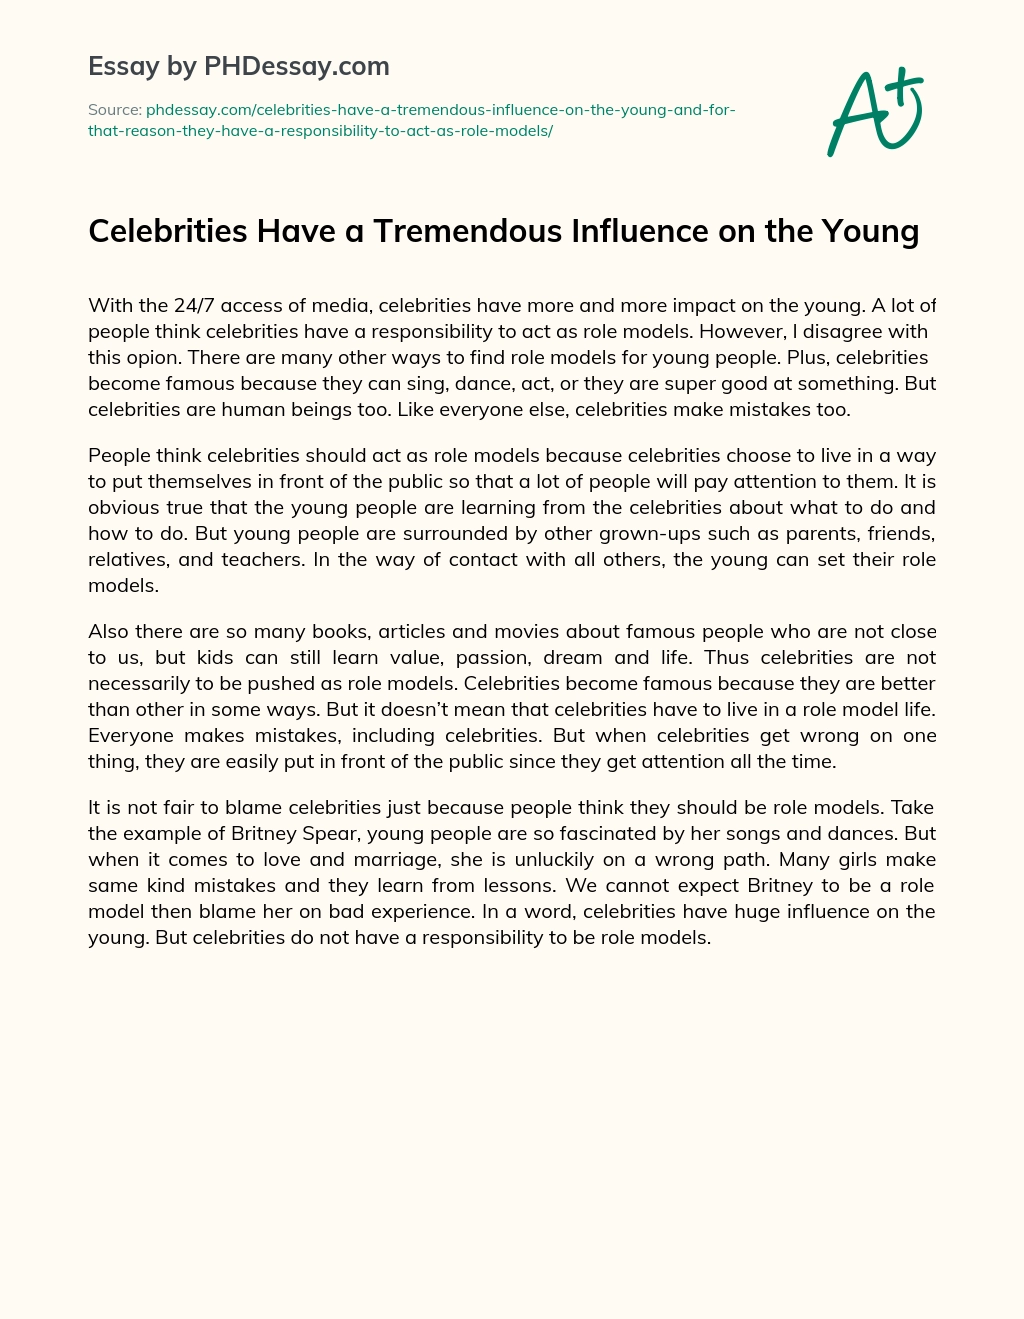 Celebrities Have a Tremendous Influence on the Young essay